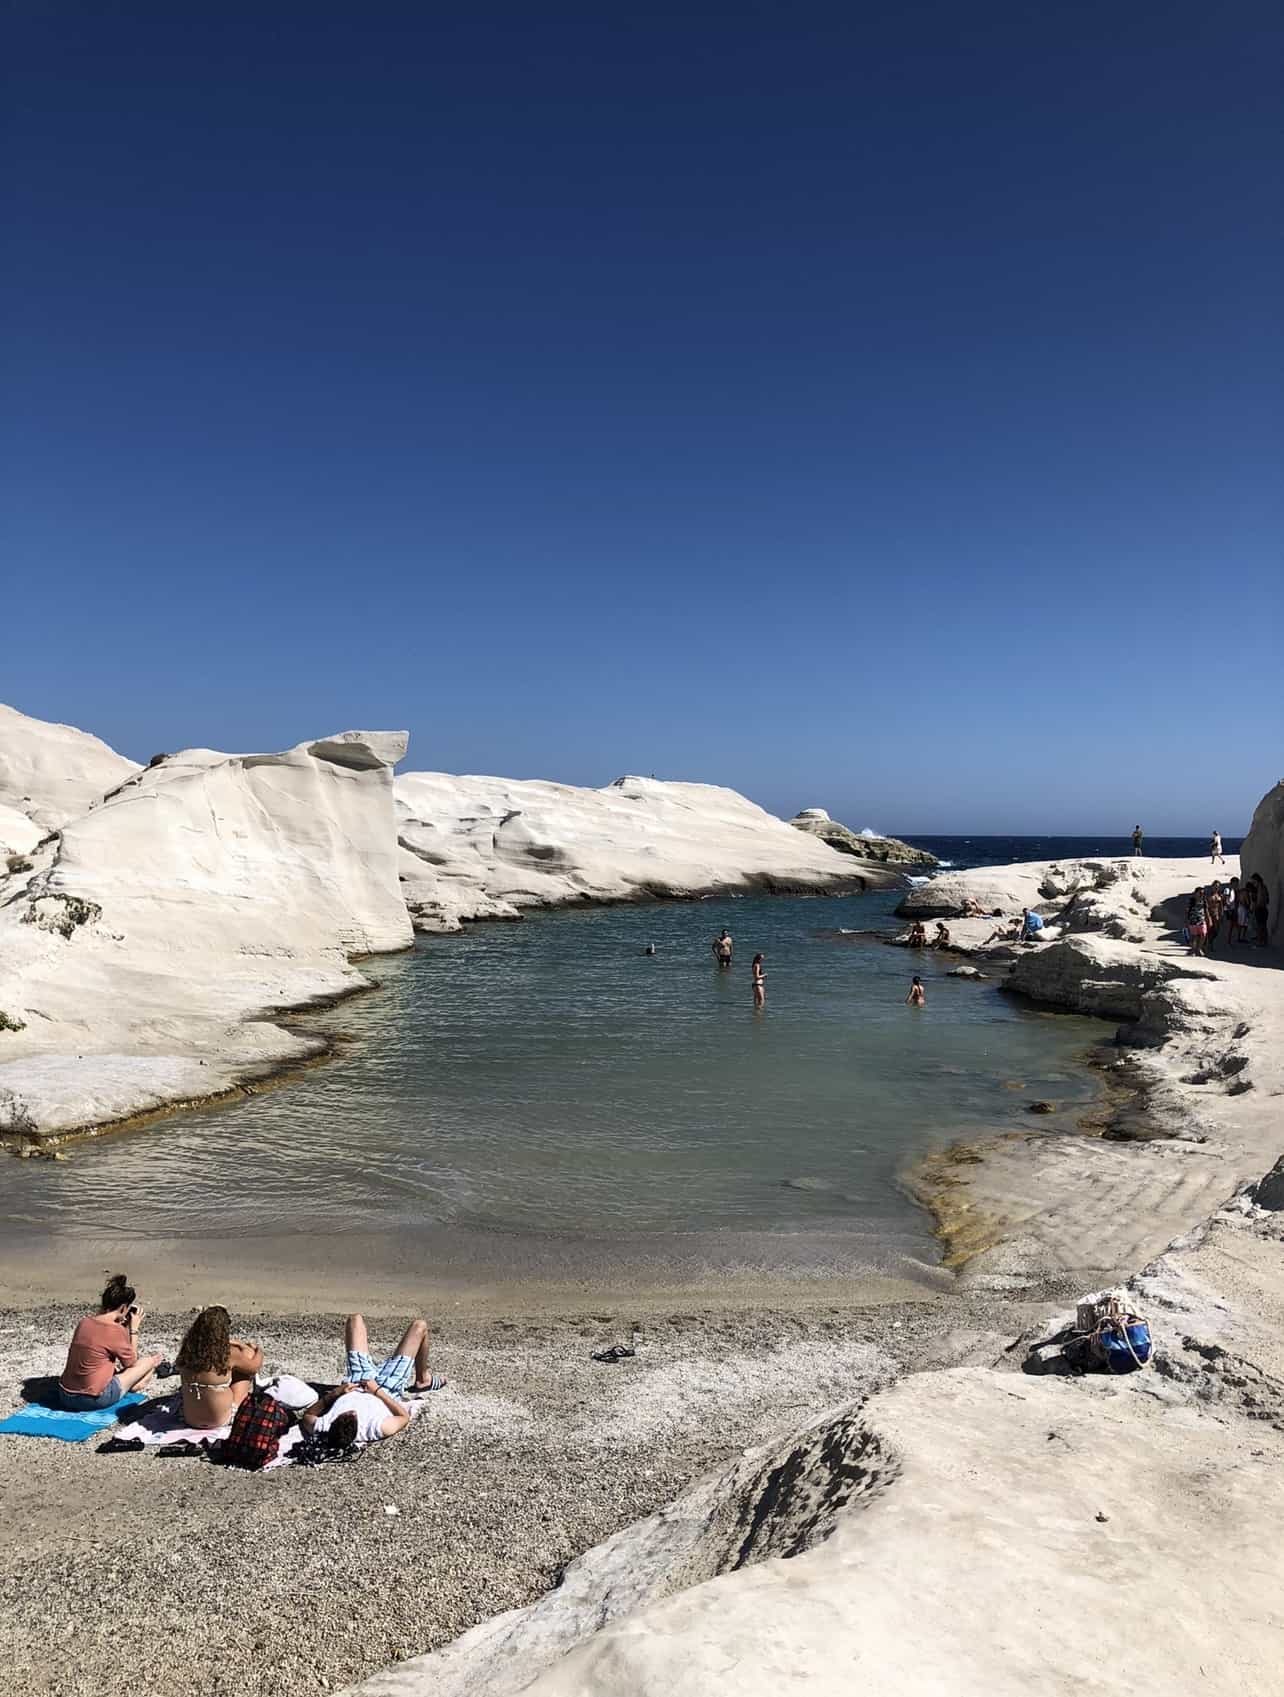 Louis Vuitton Launches Campaign on Stunning Greek Island of Milos